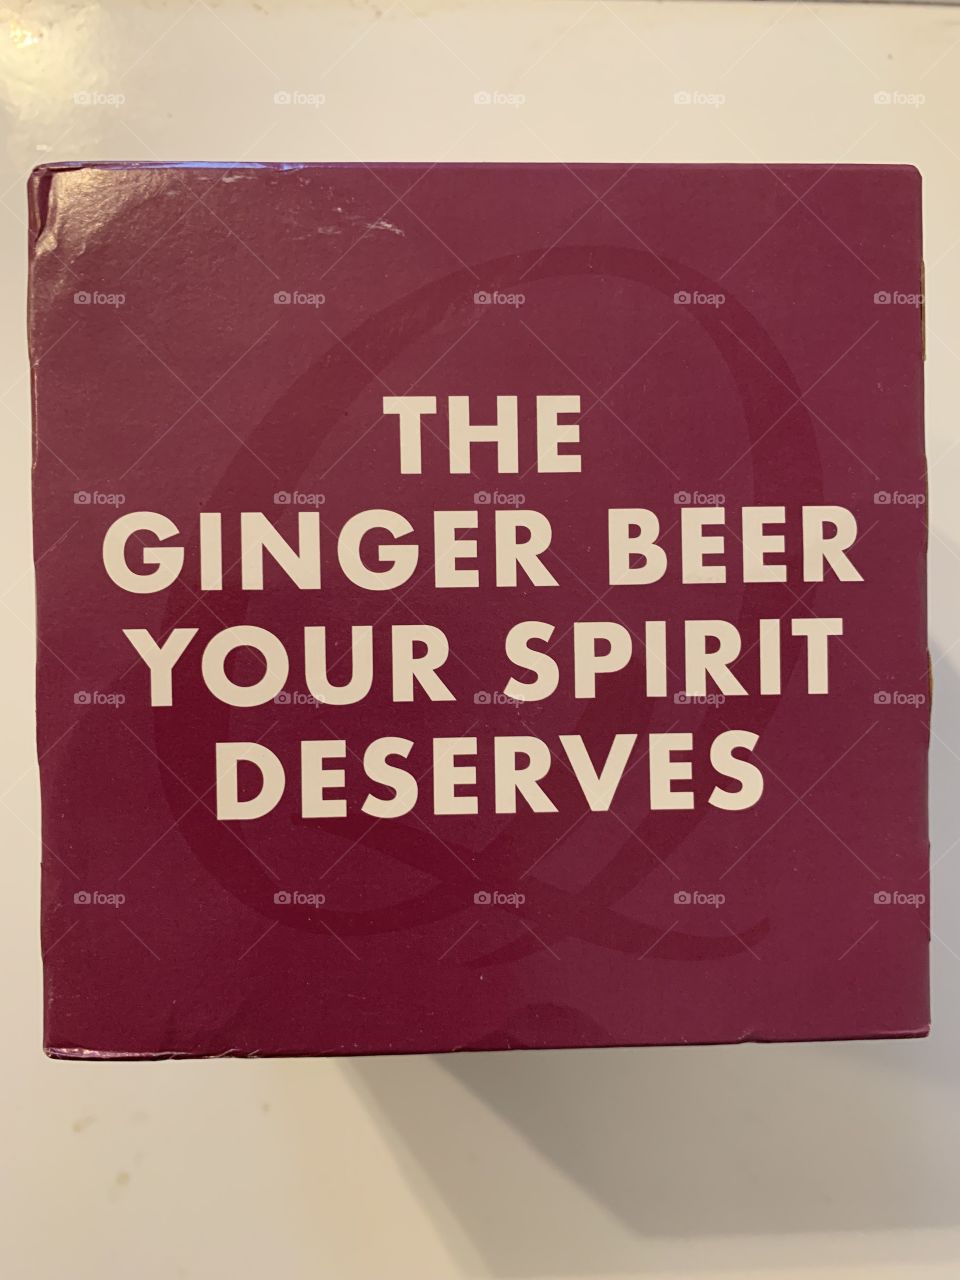 LET’S HAVE A GREAT TIME, GINGER! 